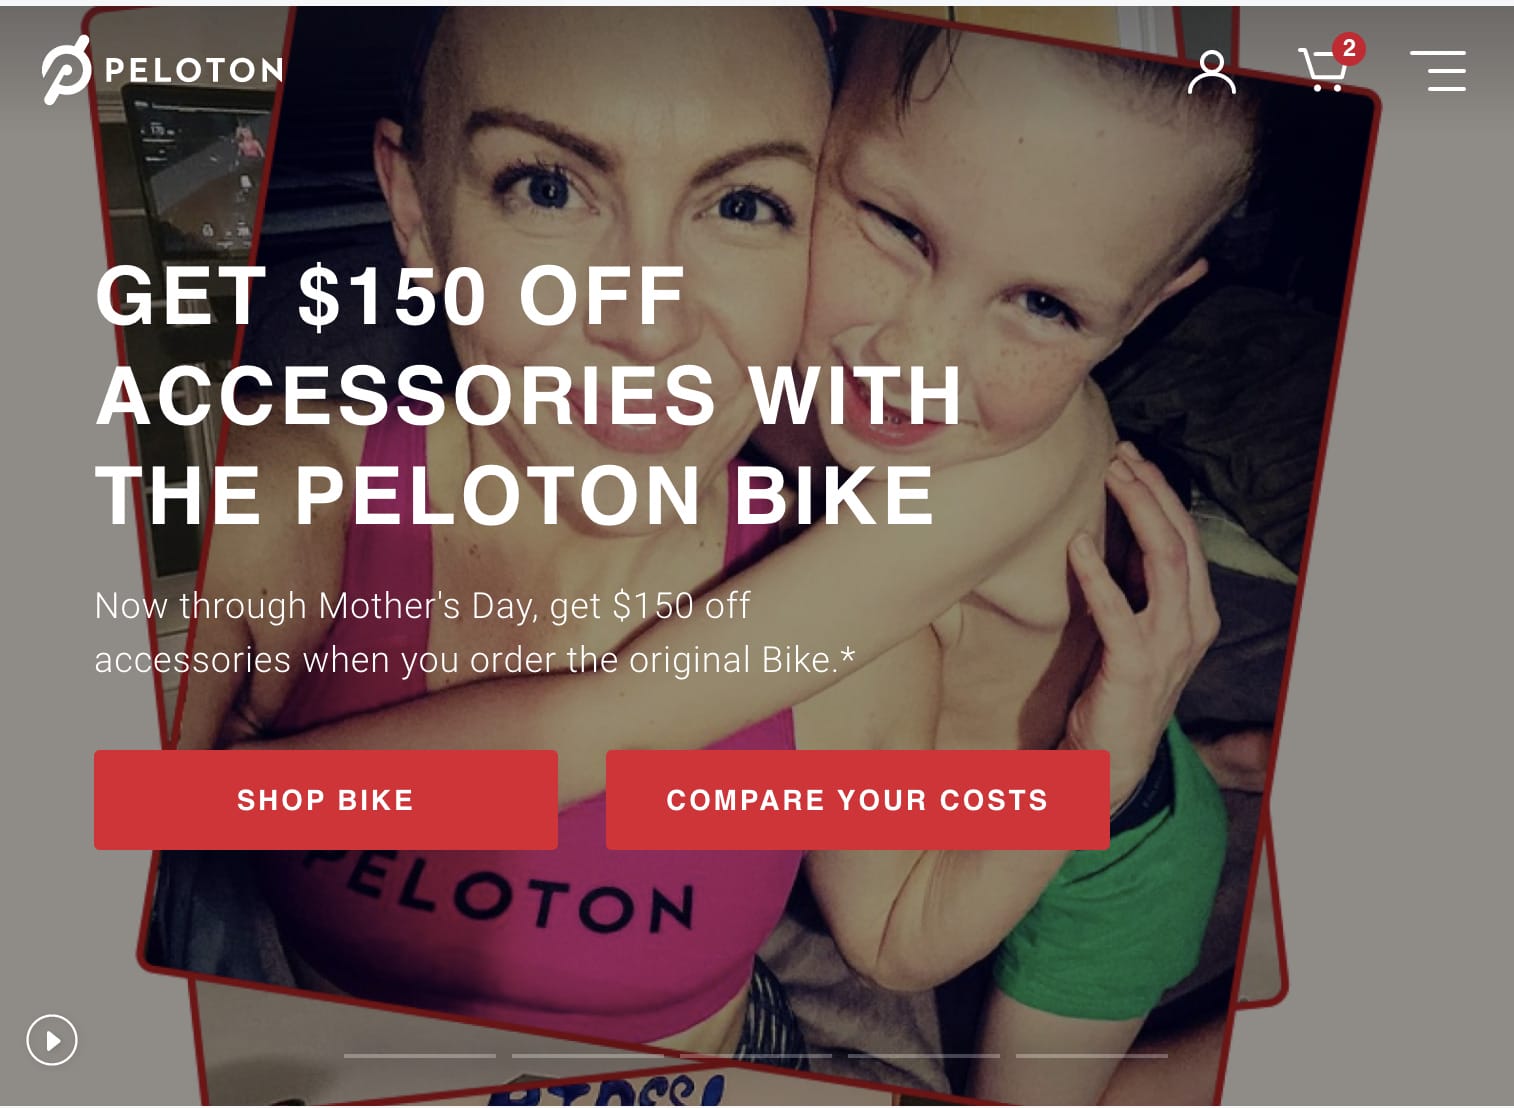 Peloton's website has details about the Mother's Day discount